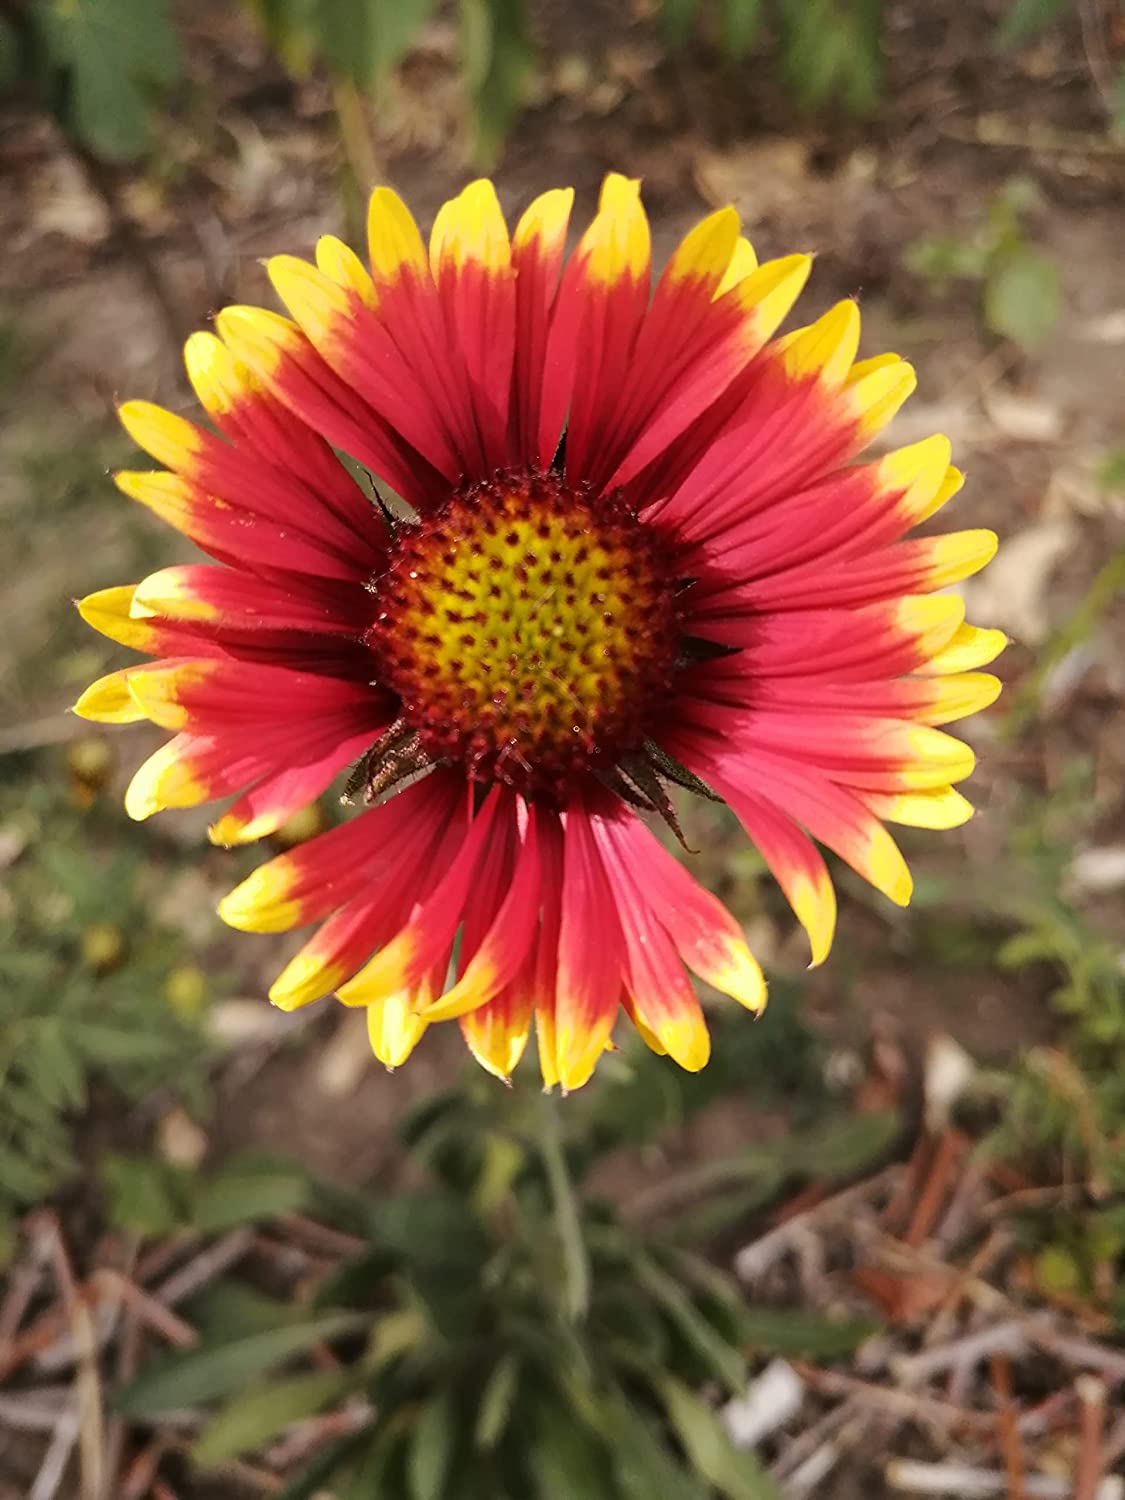 Hundredfold Burgundy Gaillardia 100 Seeds - Gaillardia aristata Blanket Flower, Native Prairie Flower, Hardy Perennial, Perfect for Care-Free Bee & Flower Garden, Packed and Shipped in Canada